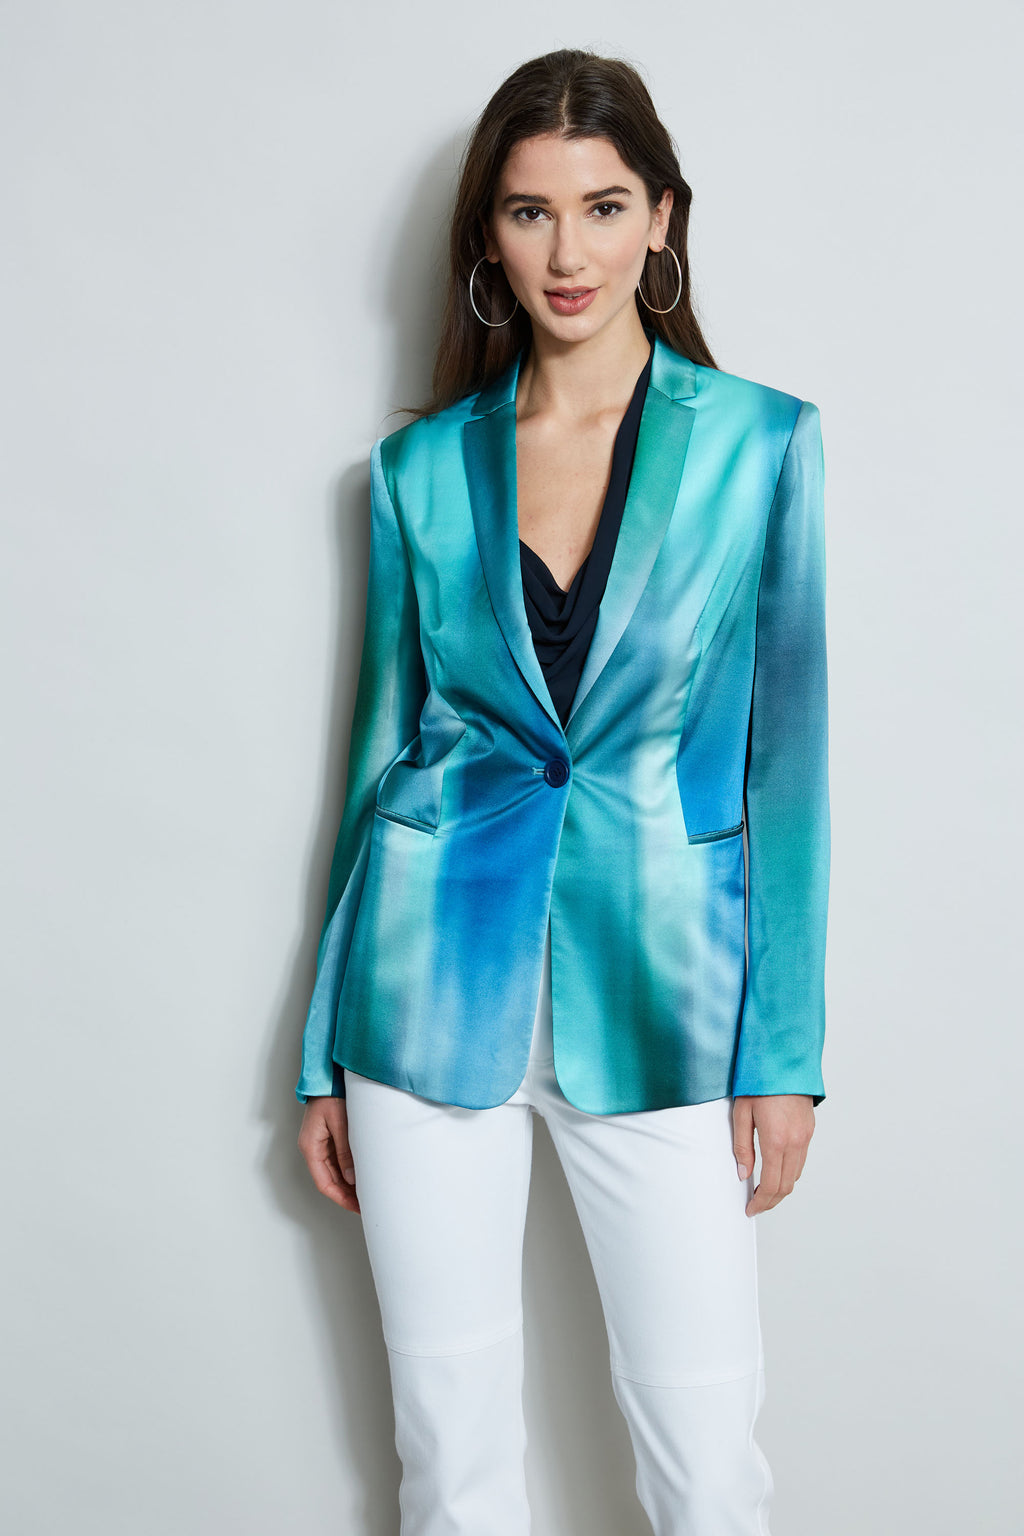 LEYAN - GREEN OMBRE JACKET WITH BUSTIER AND PANTS – Studio East6